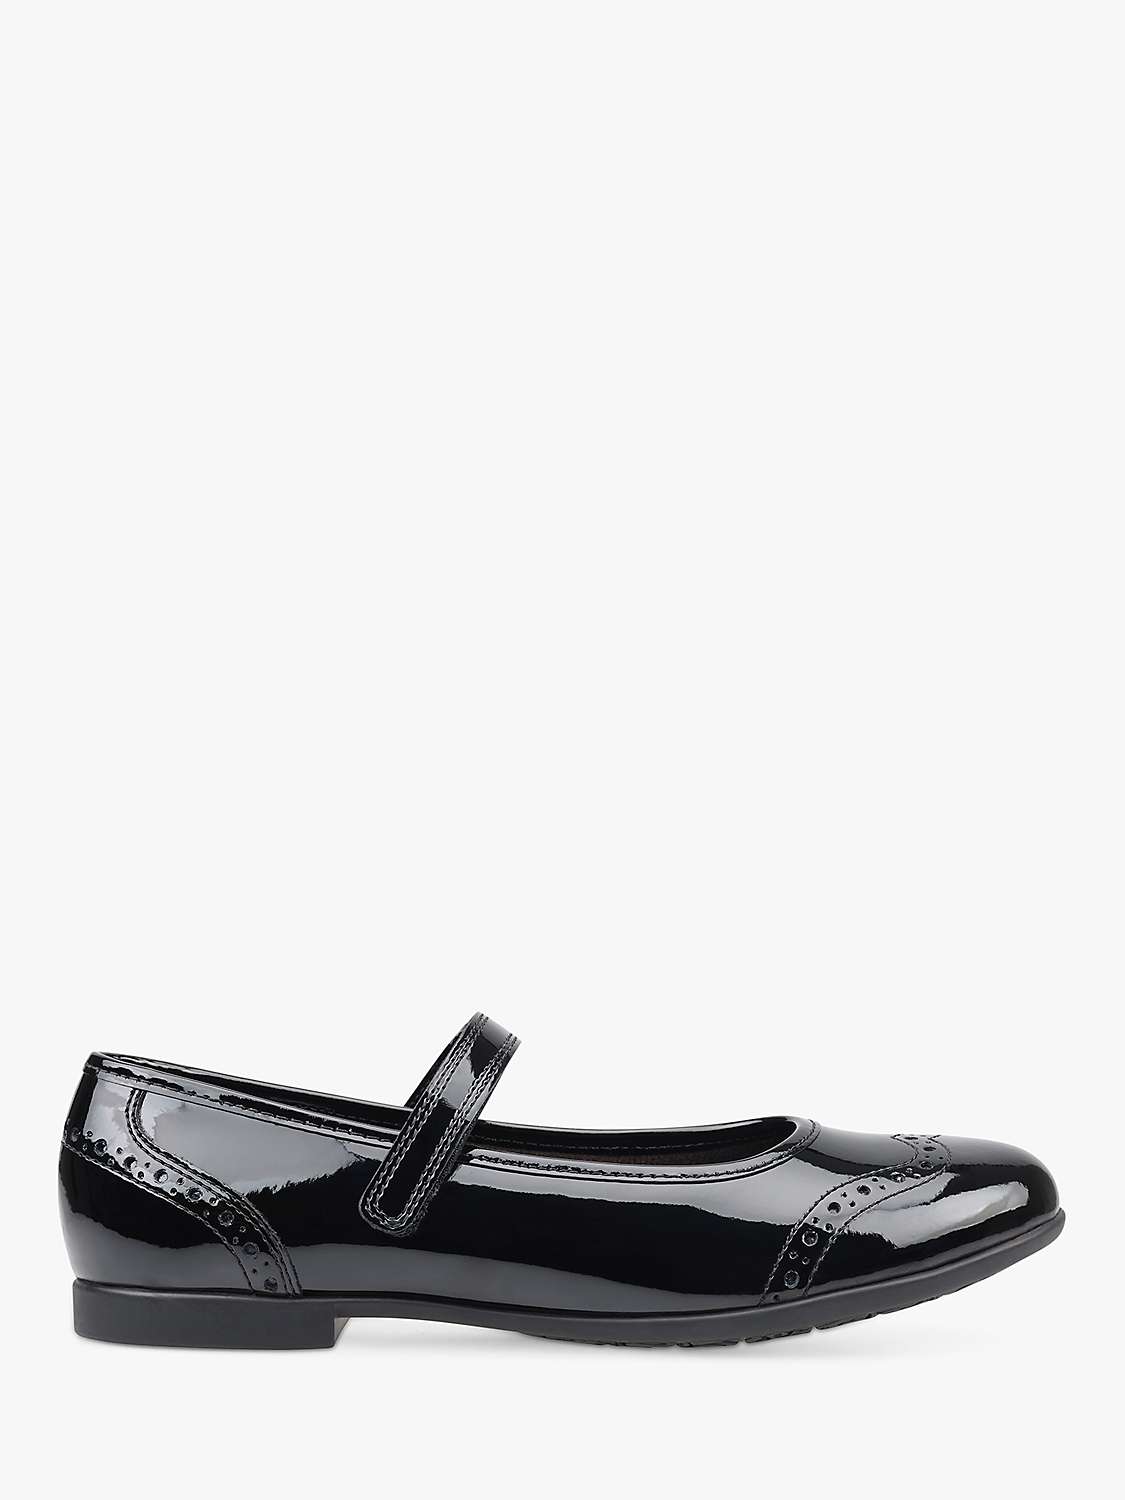 Buy Start-Rite Children's Impress Patent Leather Shoes Online at johnlewis.com